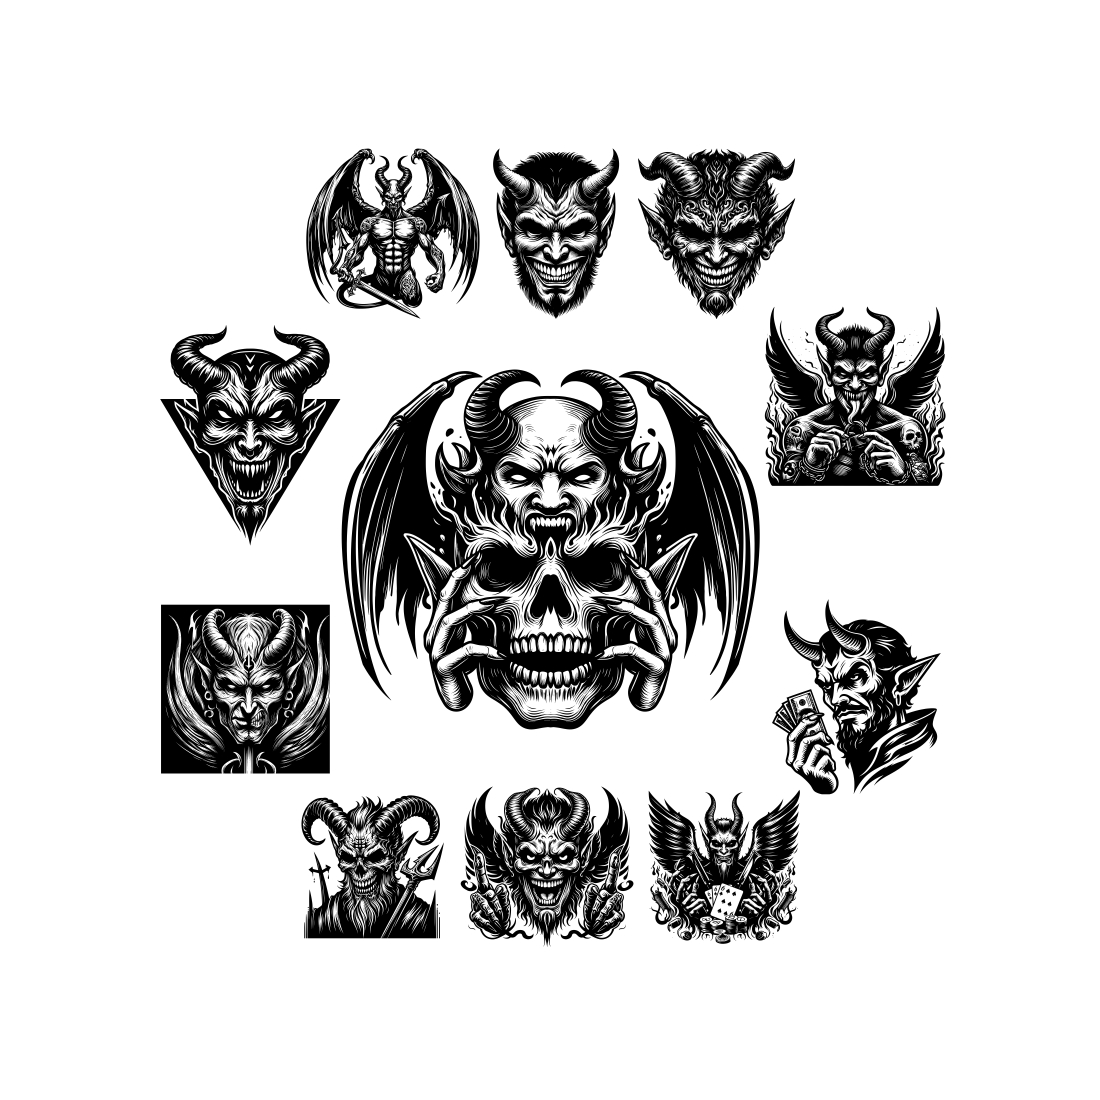 12 Illustration of a black and white devil - only 5$ preview image.